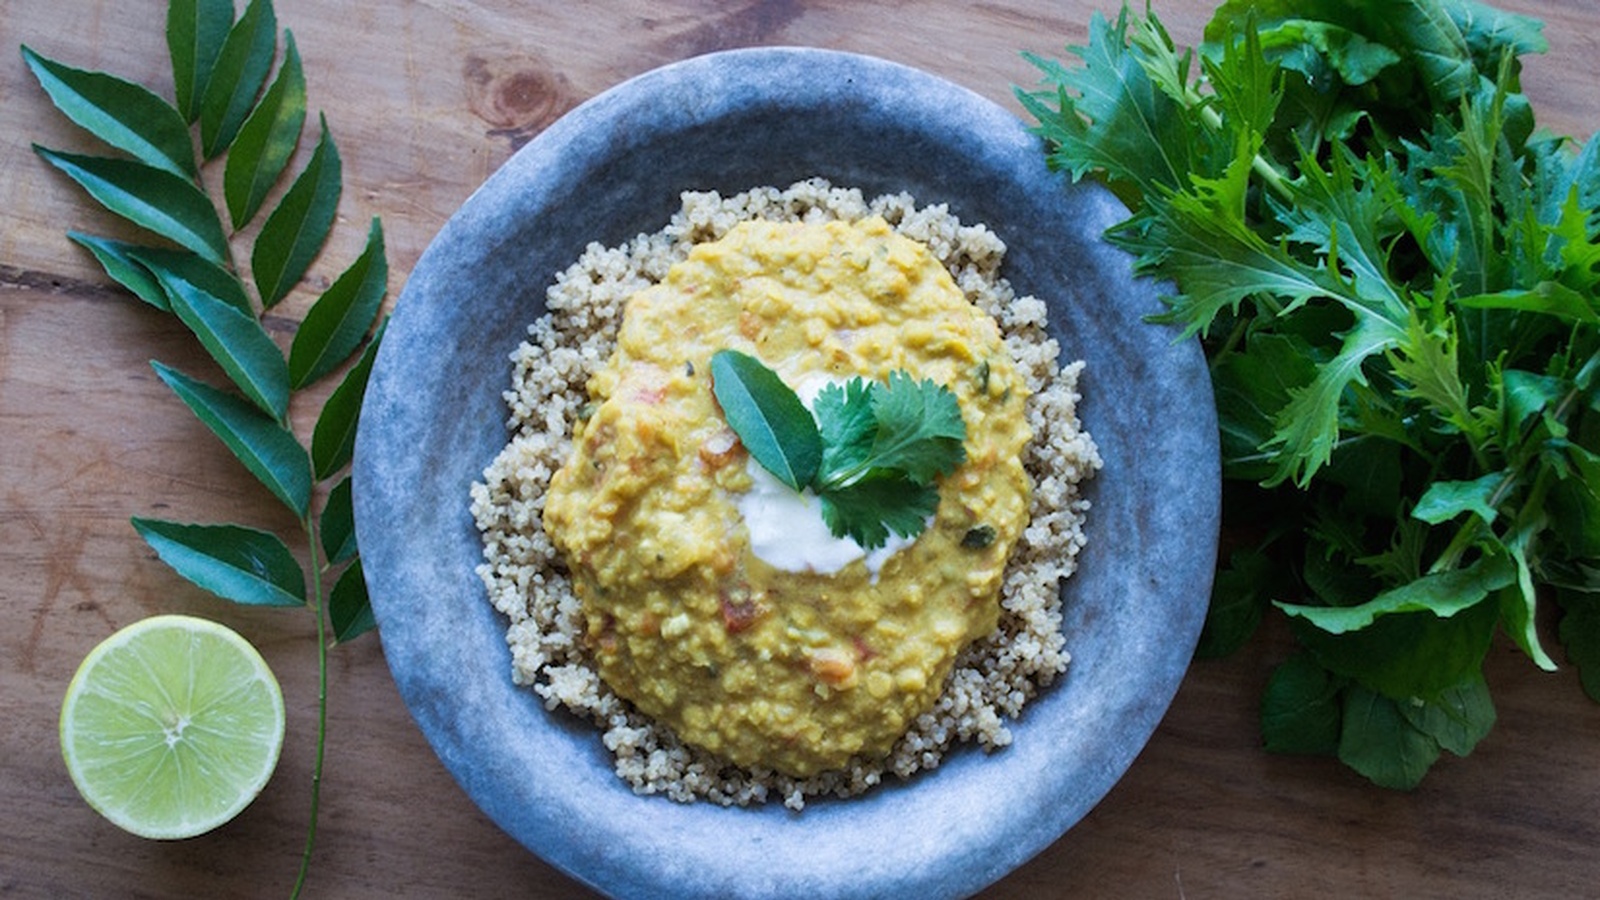 Quick and Easy Dhal